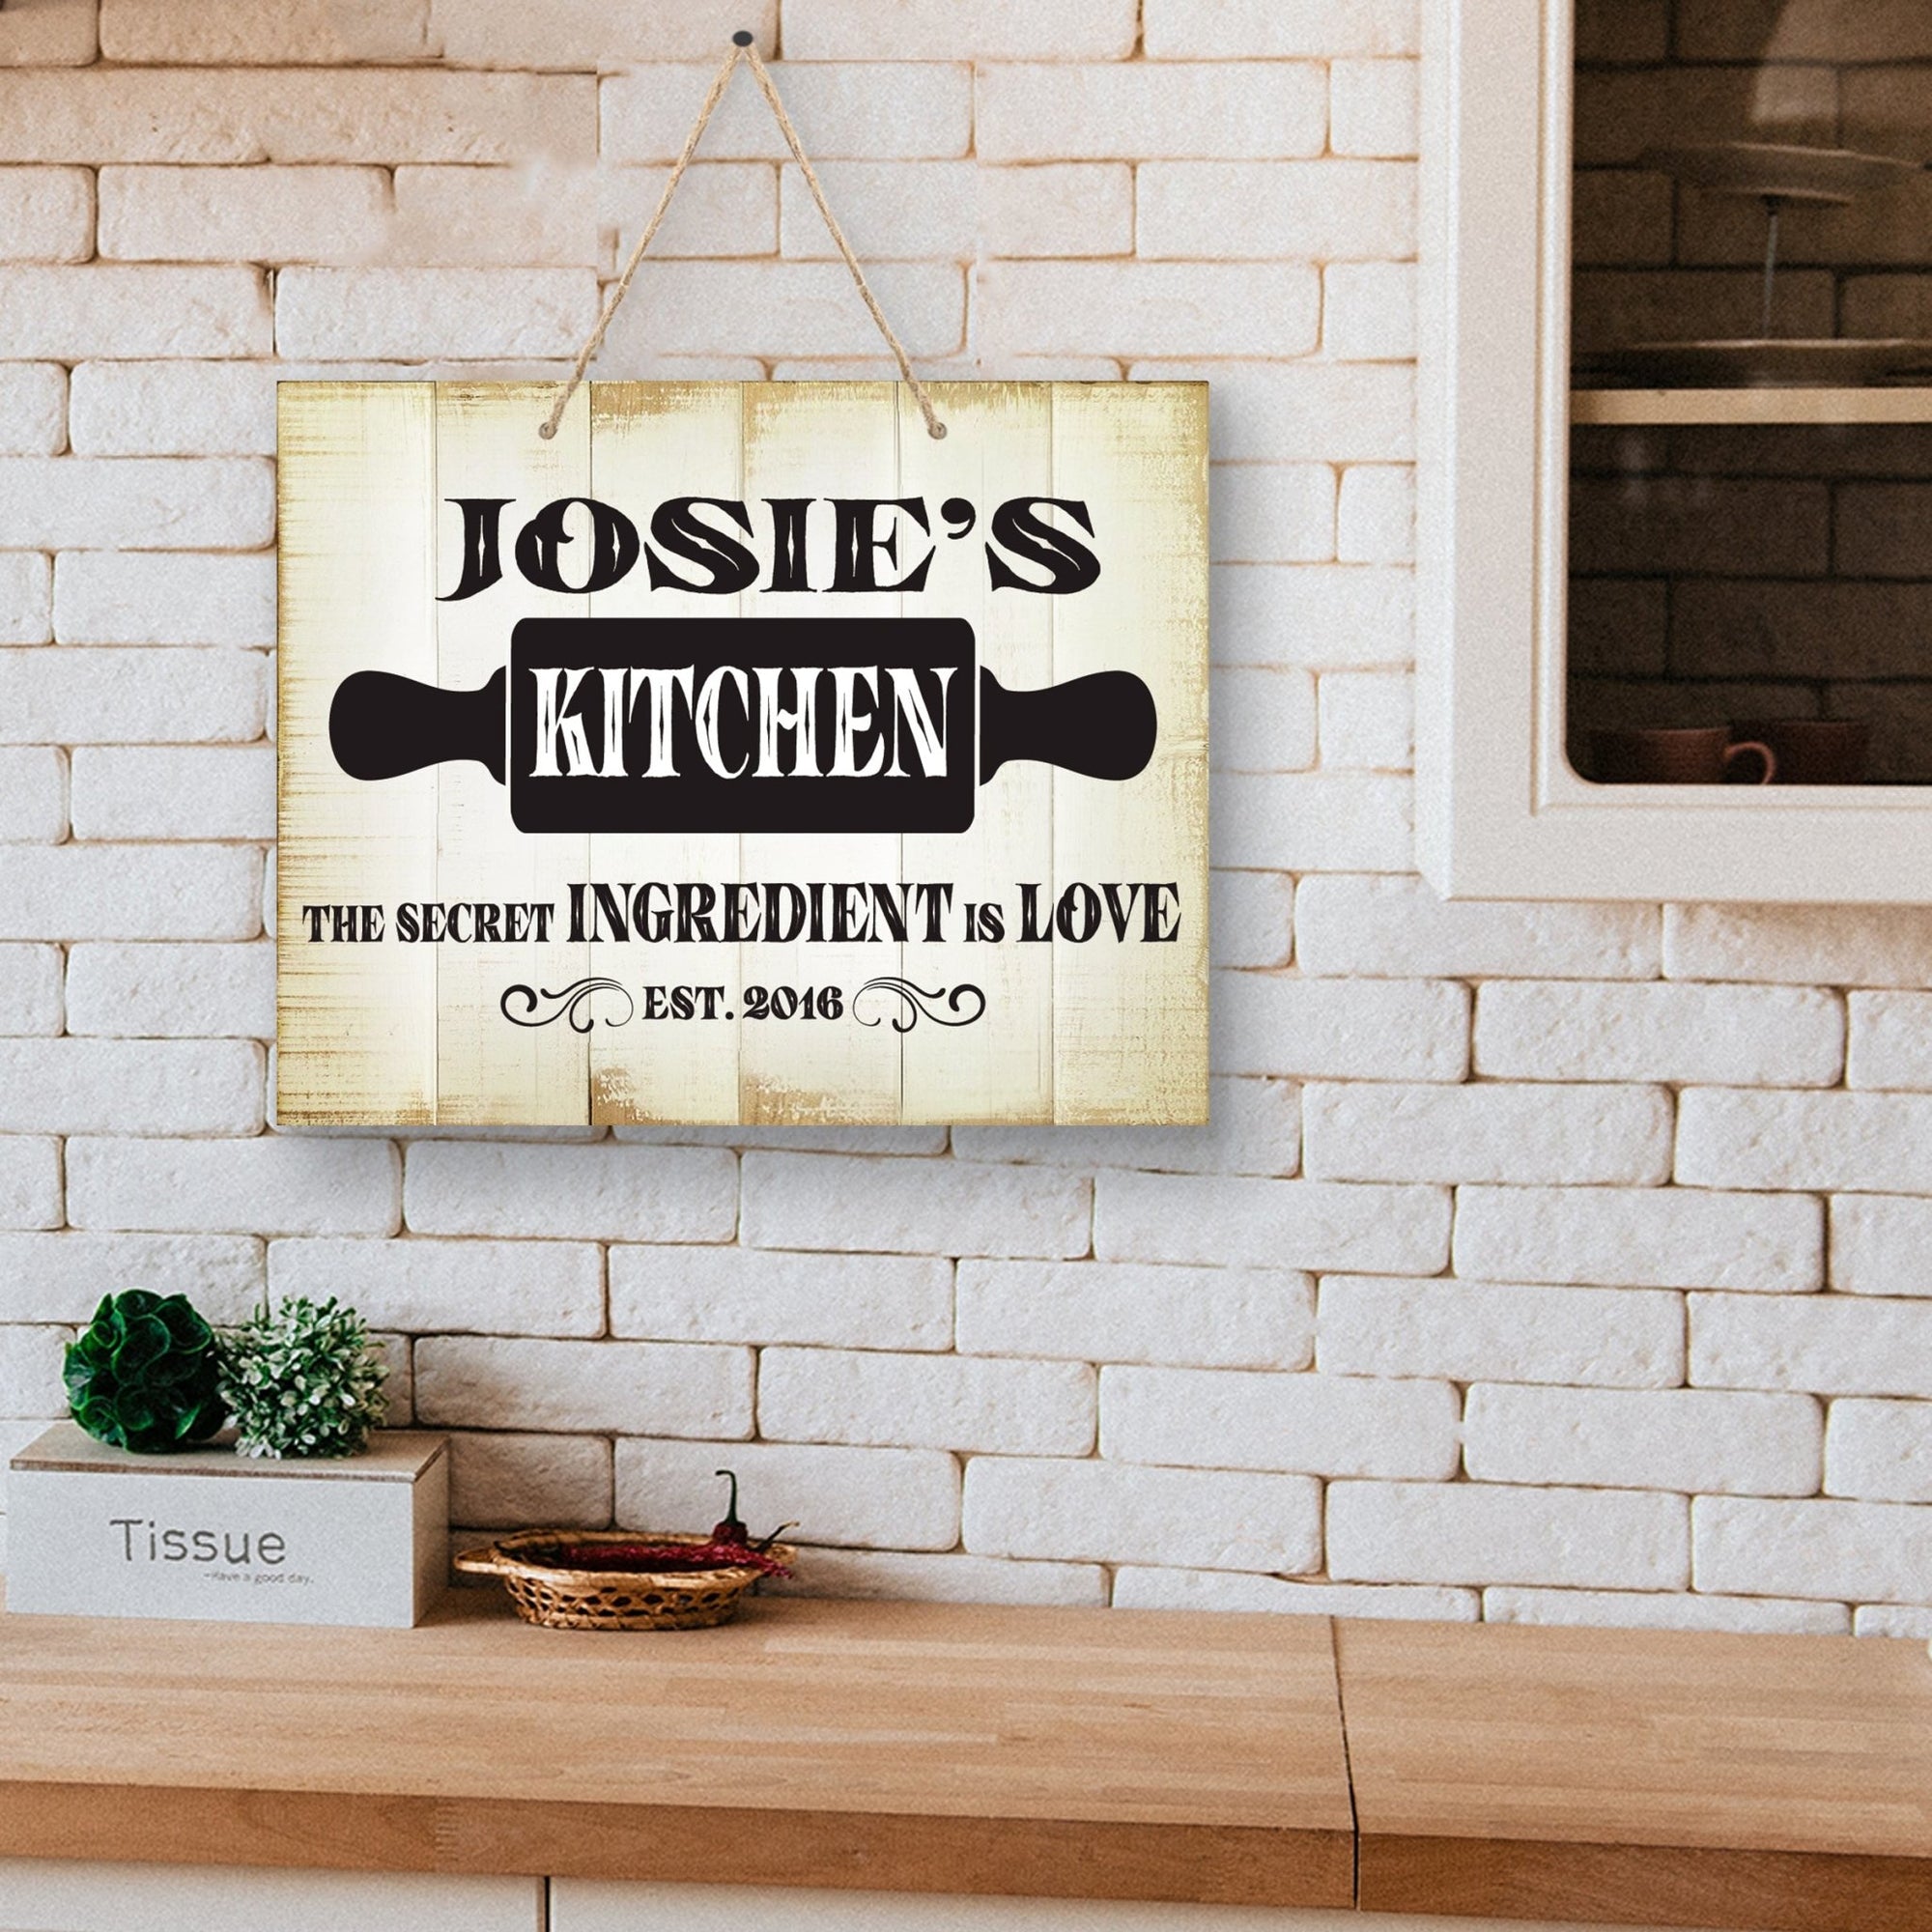 Rustic-Inspired Wooden Wall Hanging Rope Sign For Kitchen & Home Décor - Ingredients